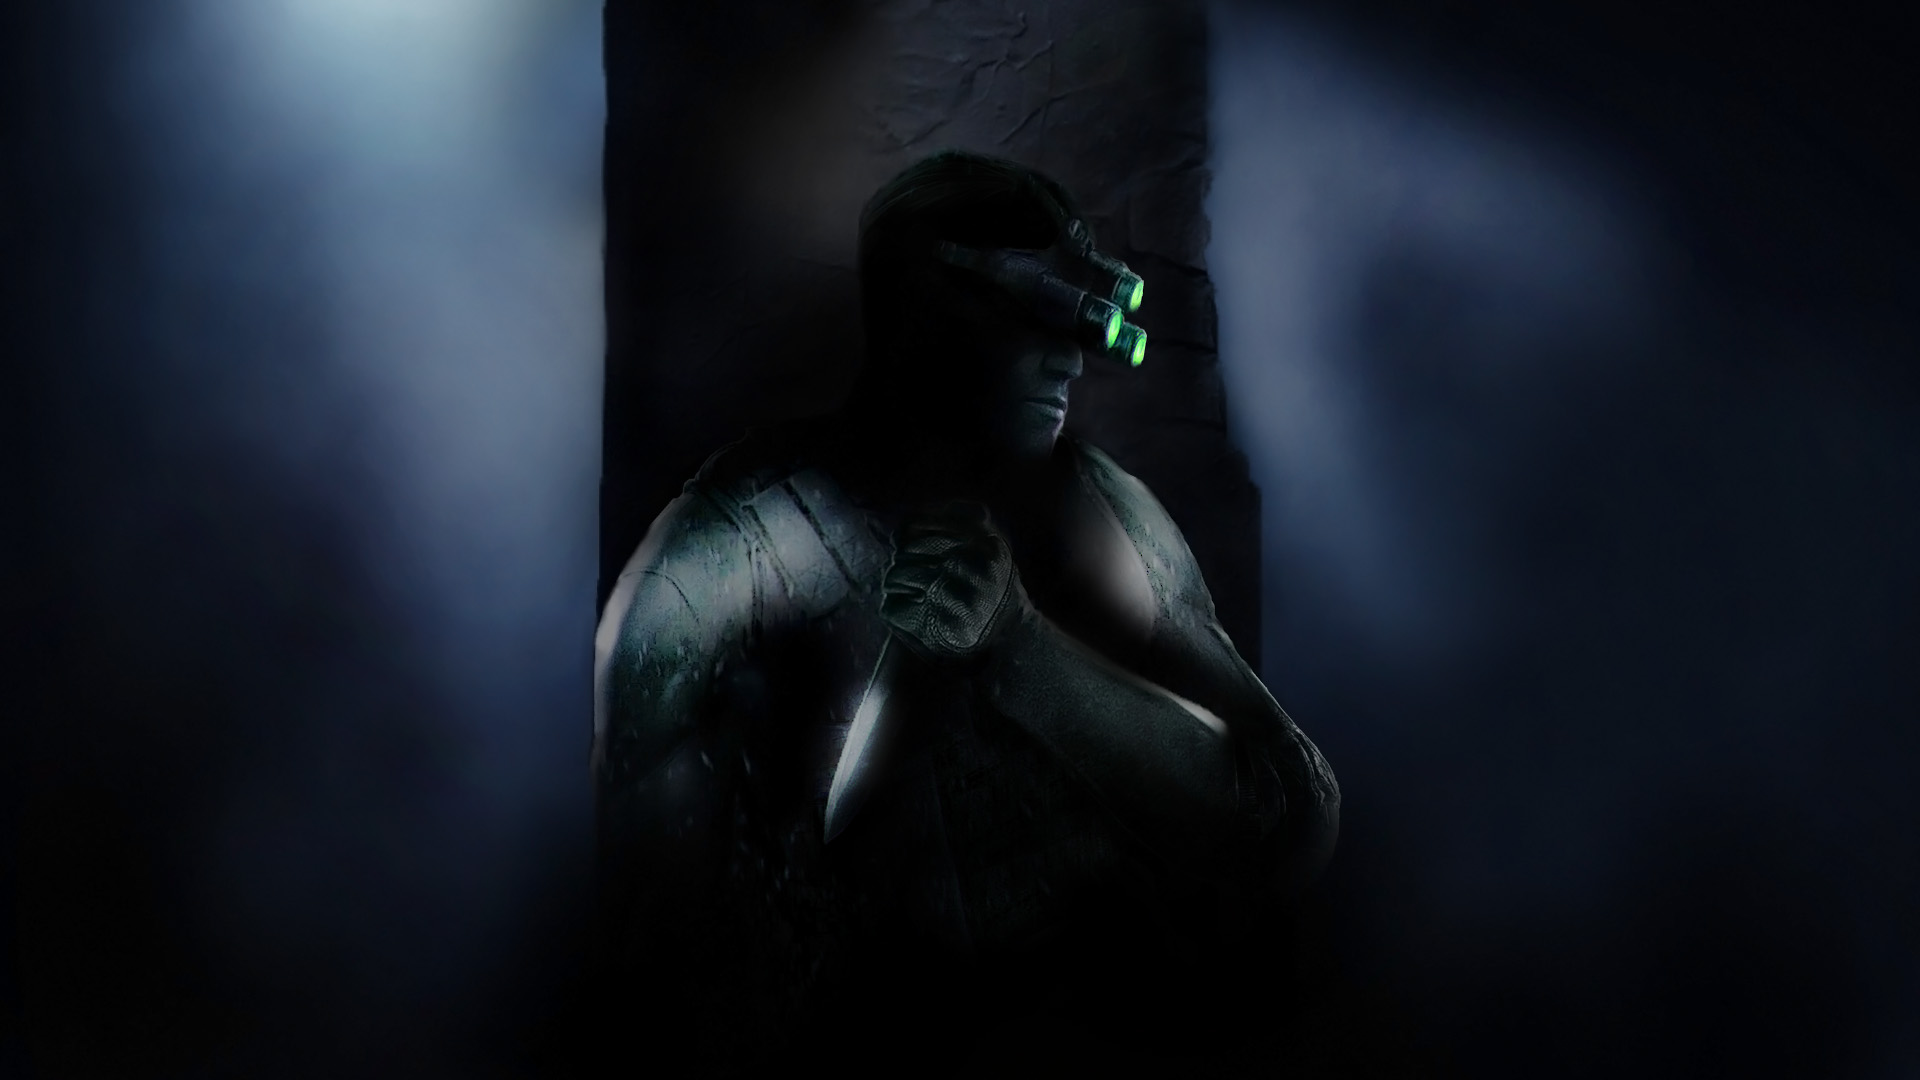 Splinter Cell Remake Release Date and Platforms: Is it coming to